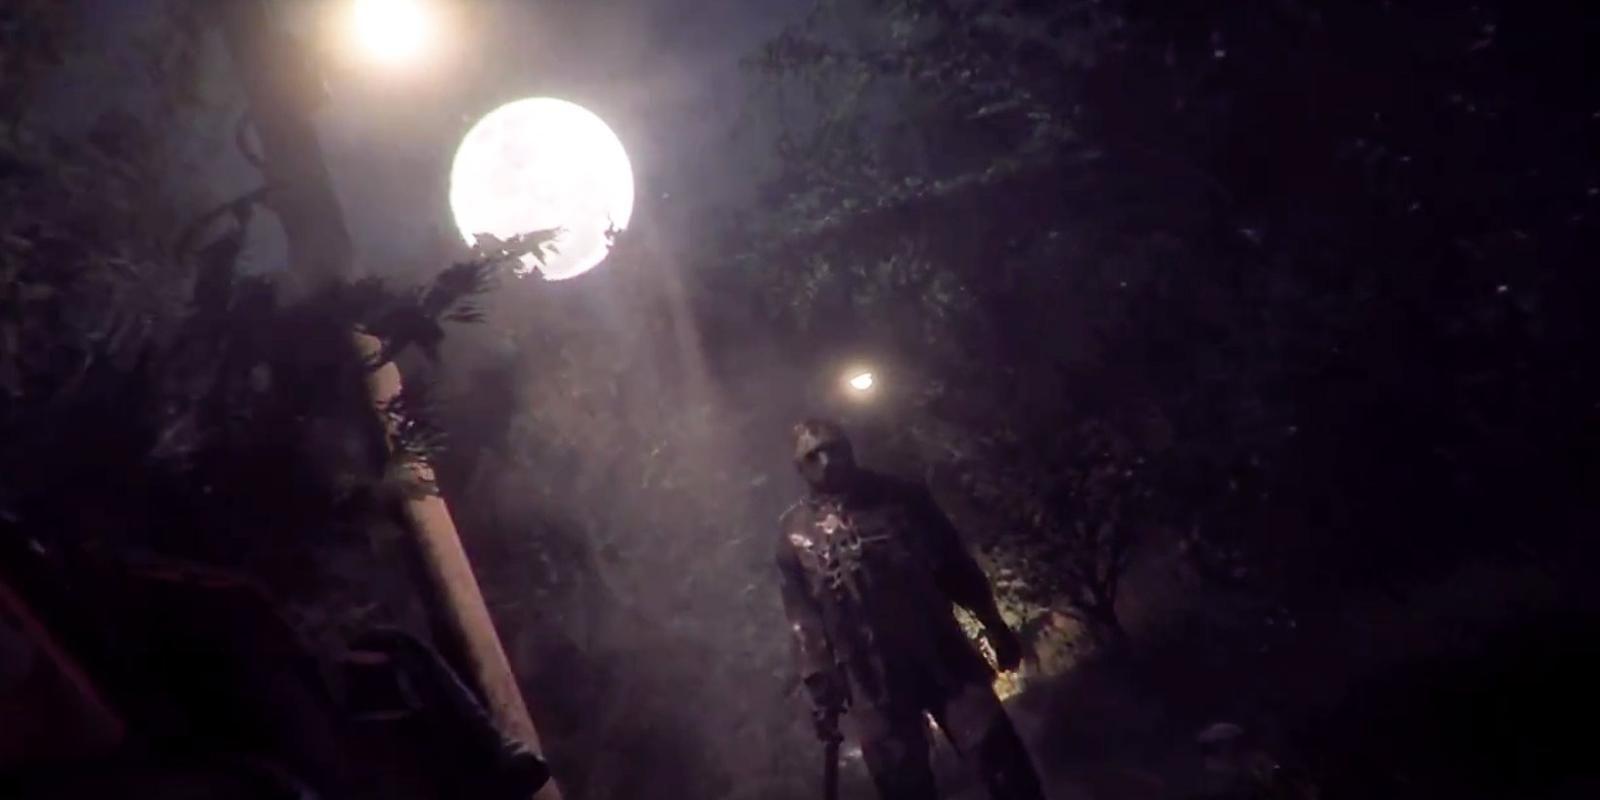 A new Friday the 13th multiplayer game will let you play as Jason